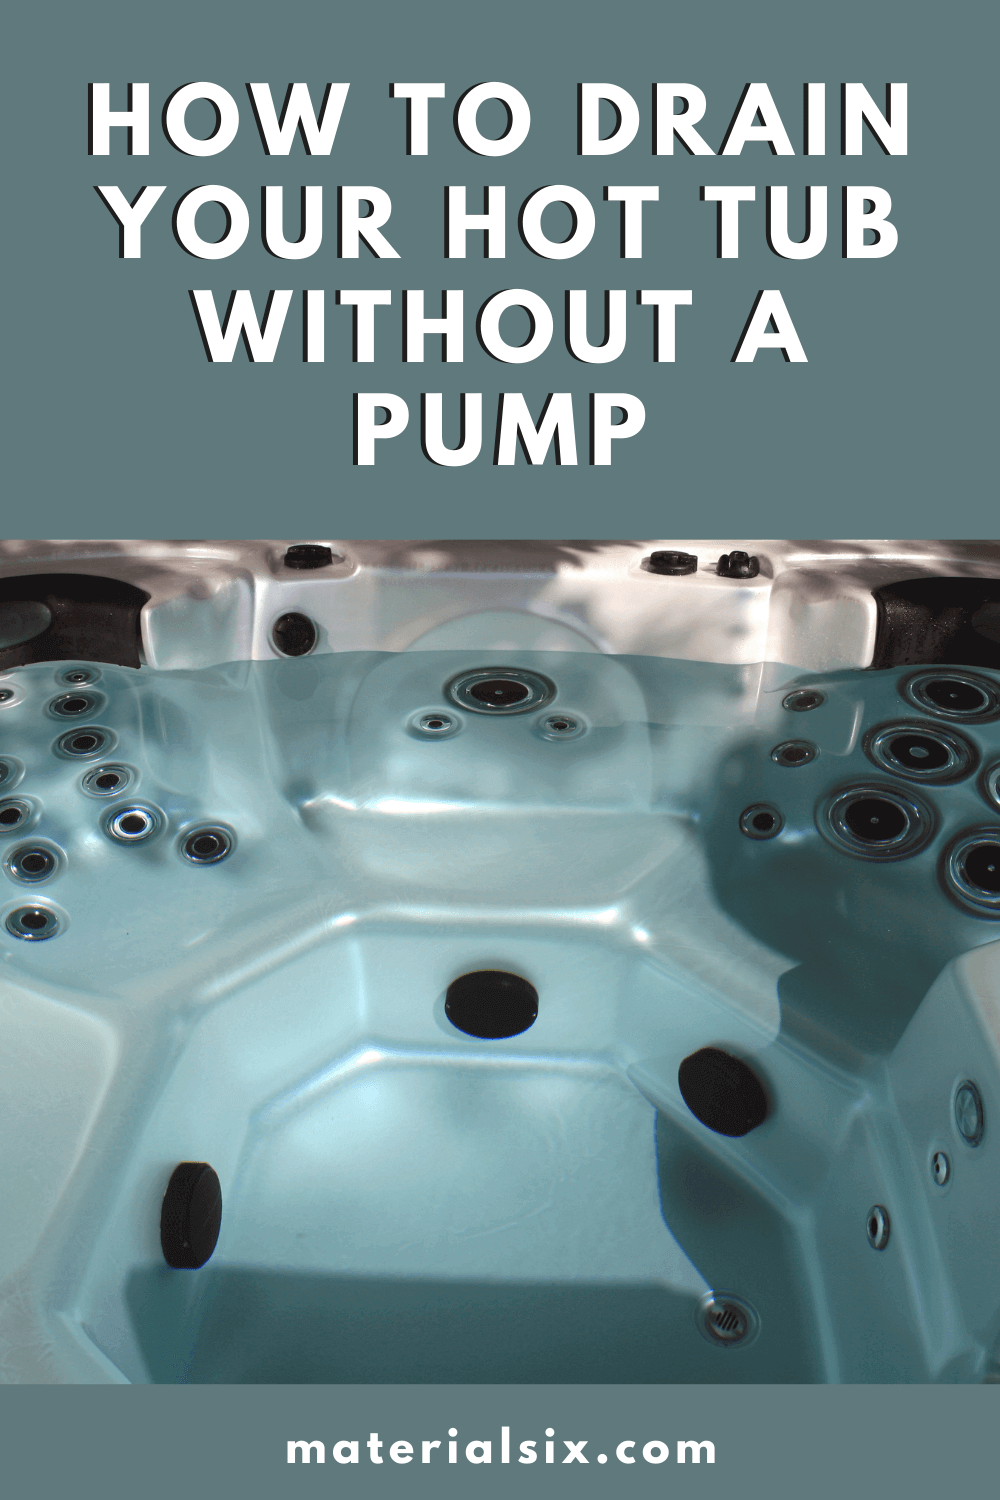 How to Drain Your Hot Tub Without a Pump